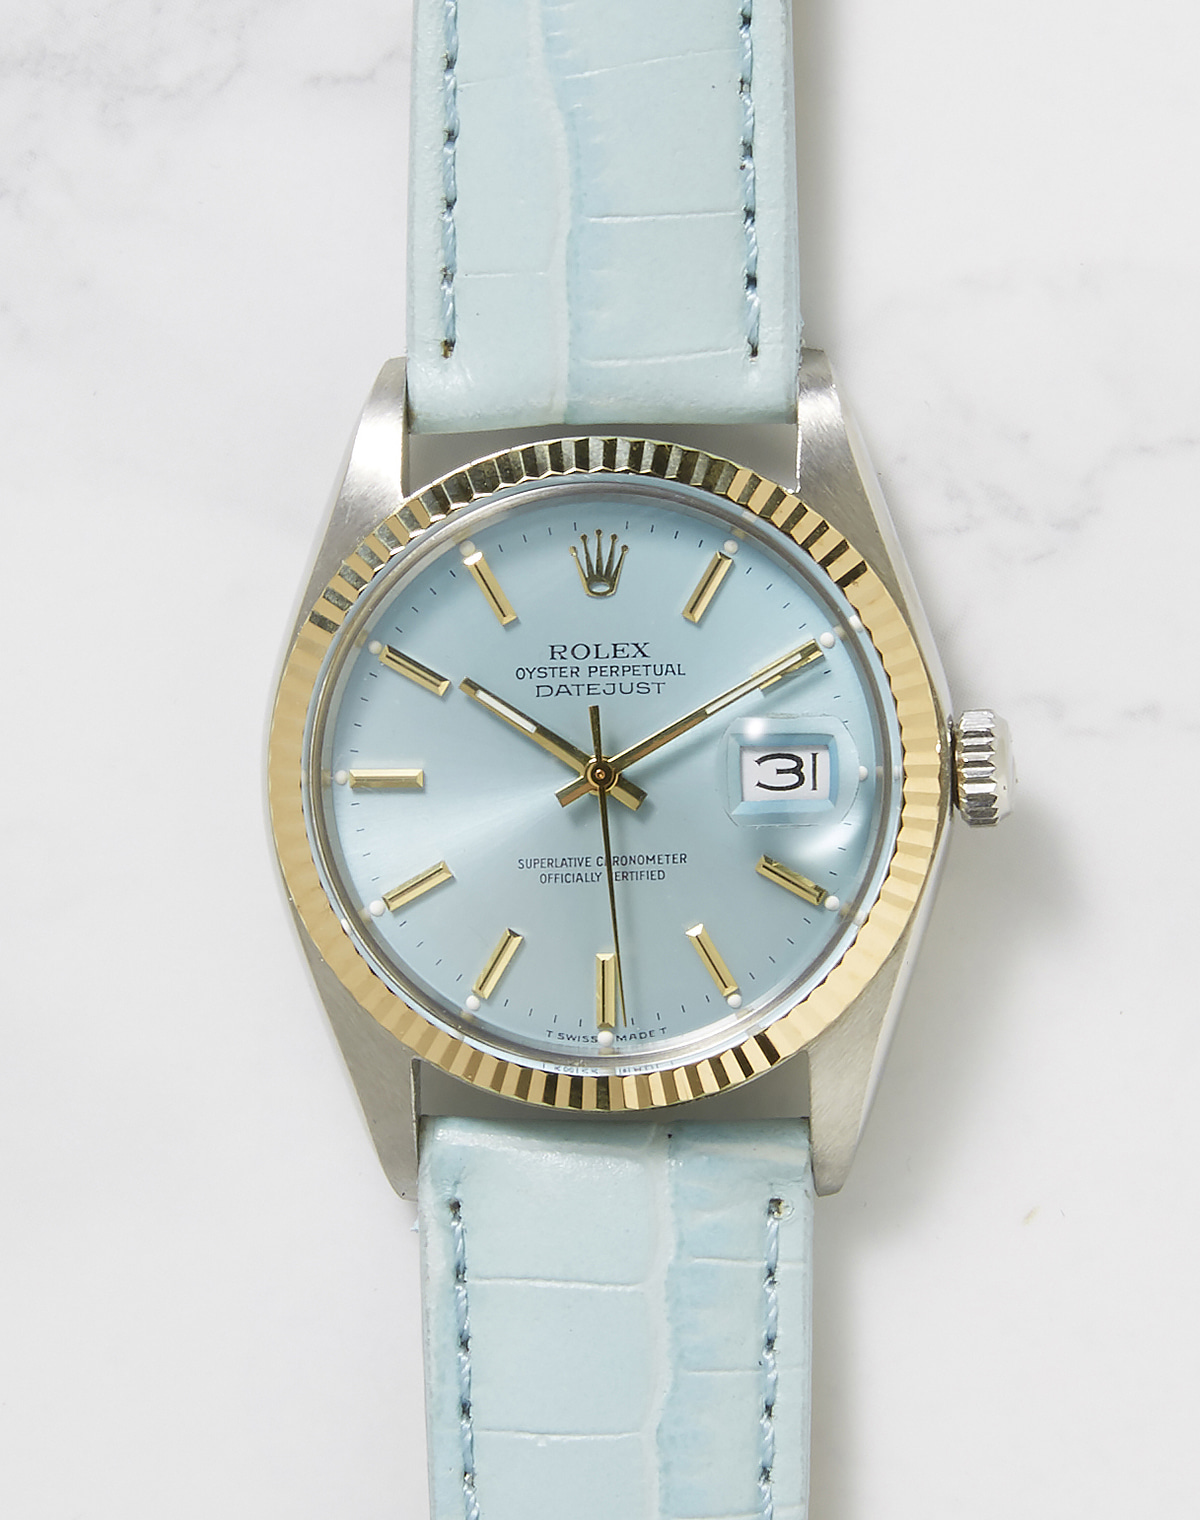 ROLEX OYSTER PERPETUAL DATEJUST 16014